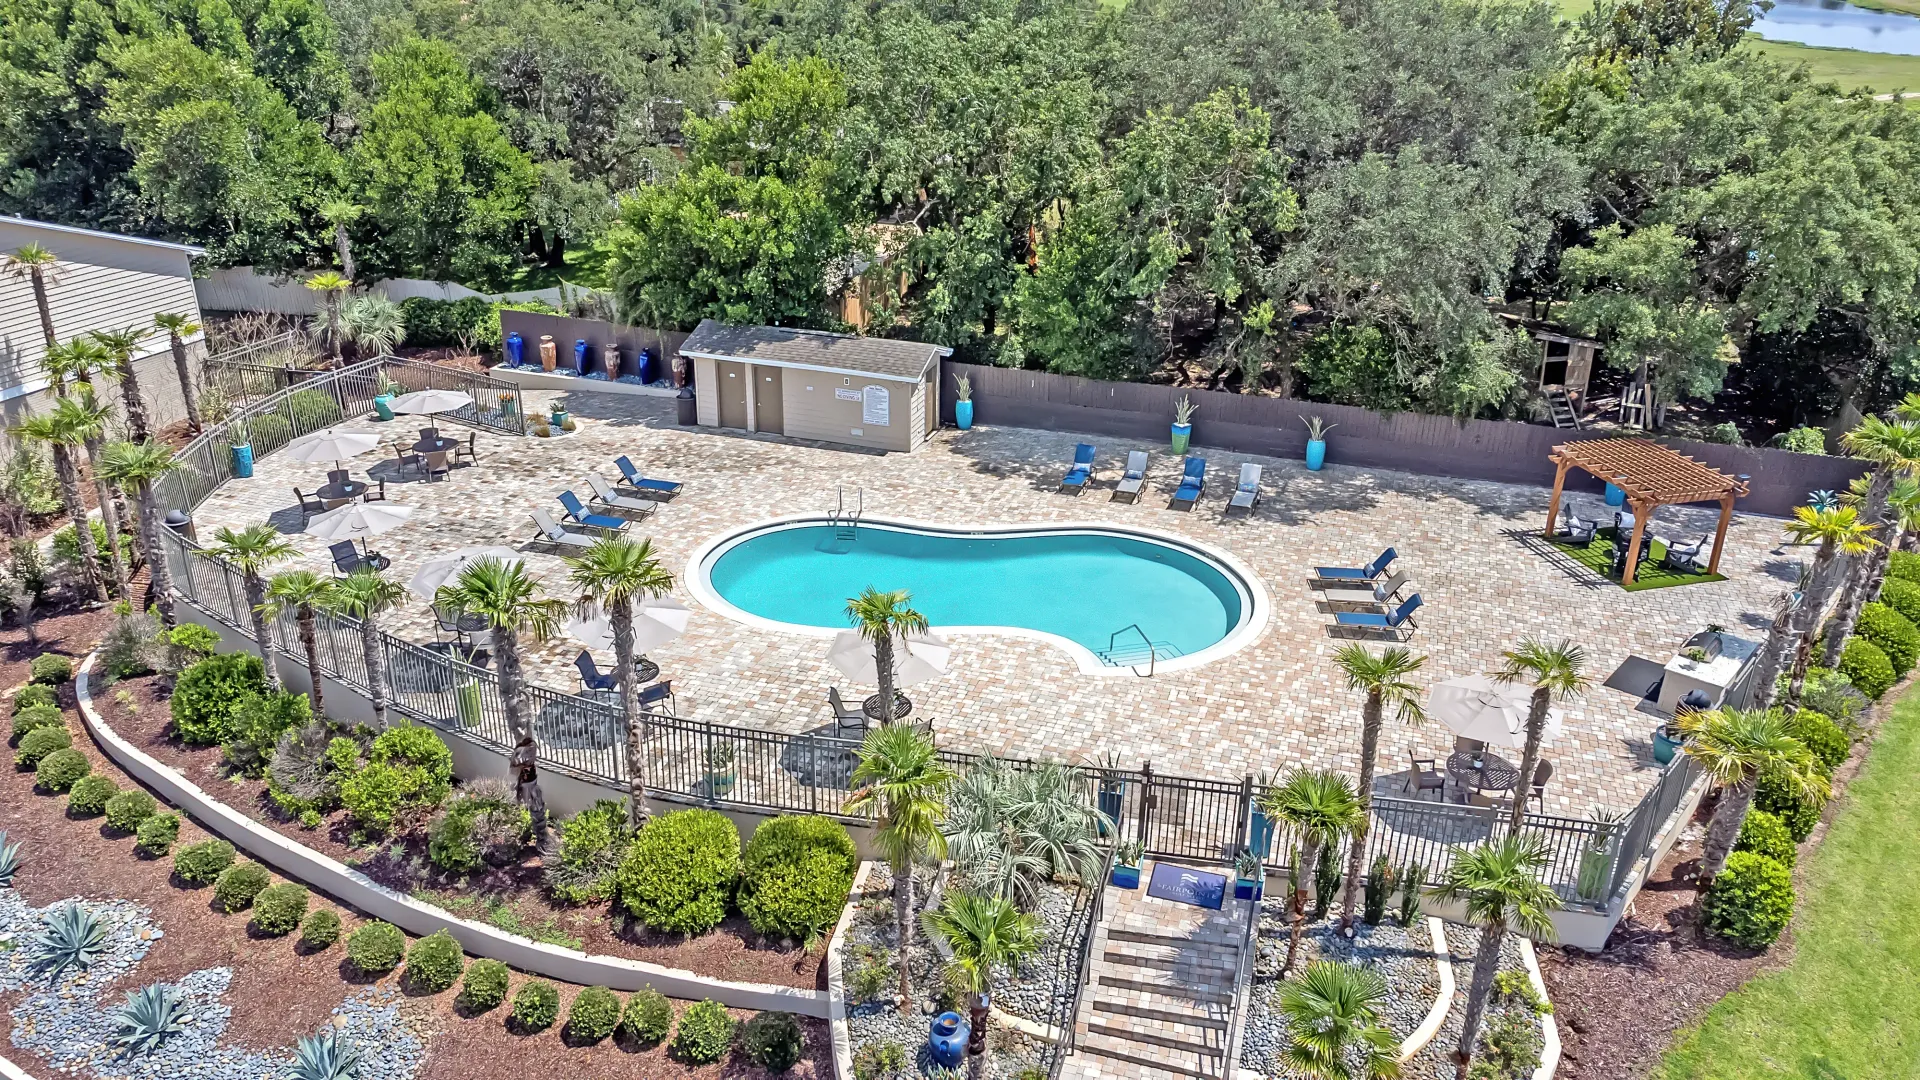 Aerial view showcasing the sparkling swimming pool, plentiful loungers and umbrella-covered tables, and lush landscaping surrounding an extravagantly paved pool deck.